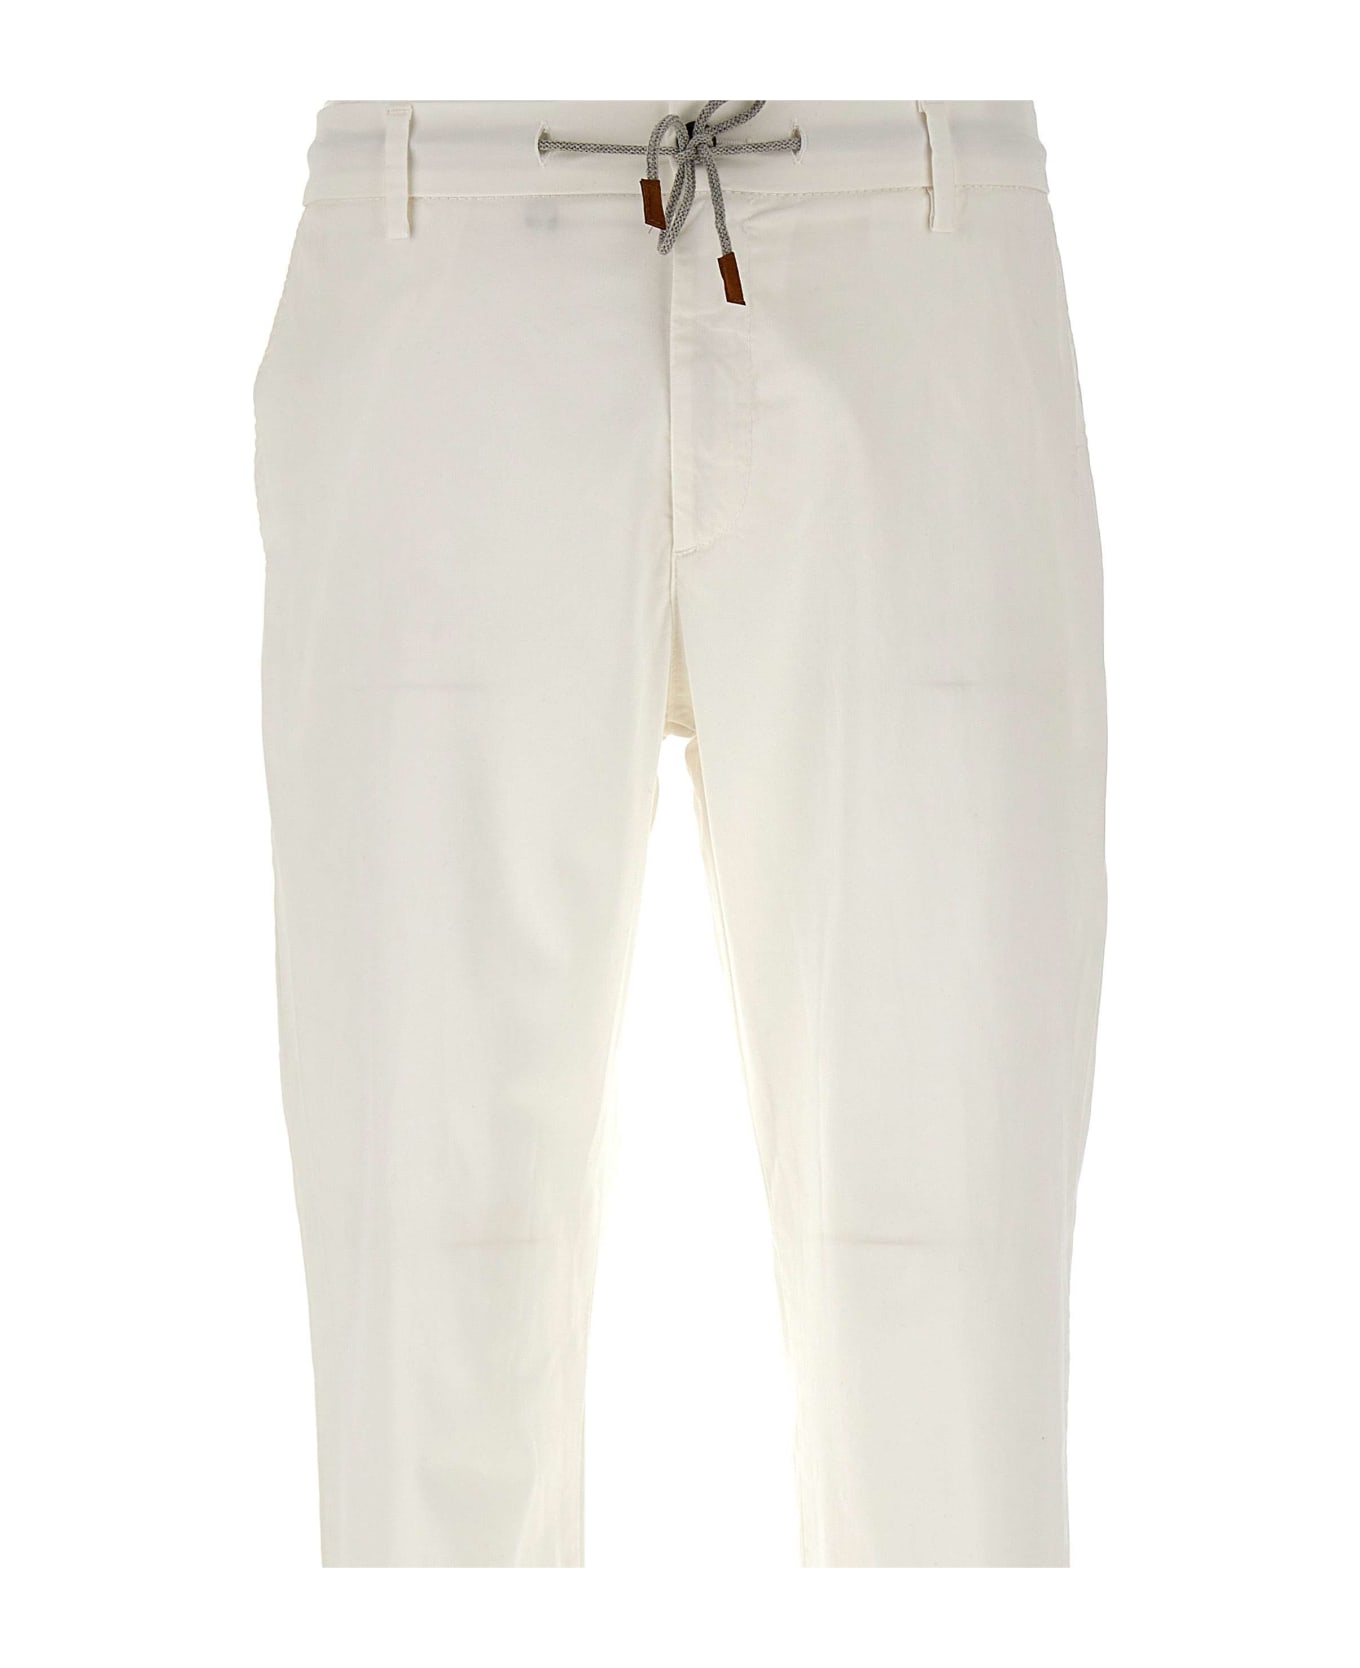 Eleventy Stretch Cotton Trousers - WHITE ボトムス